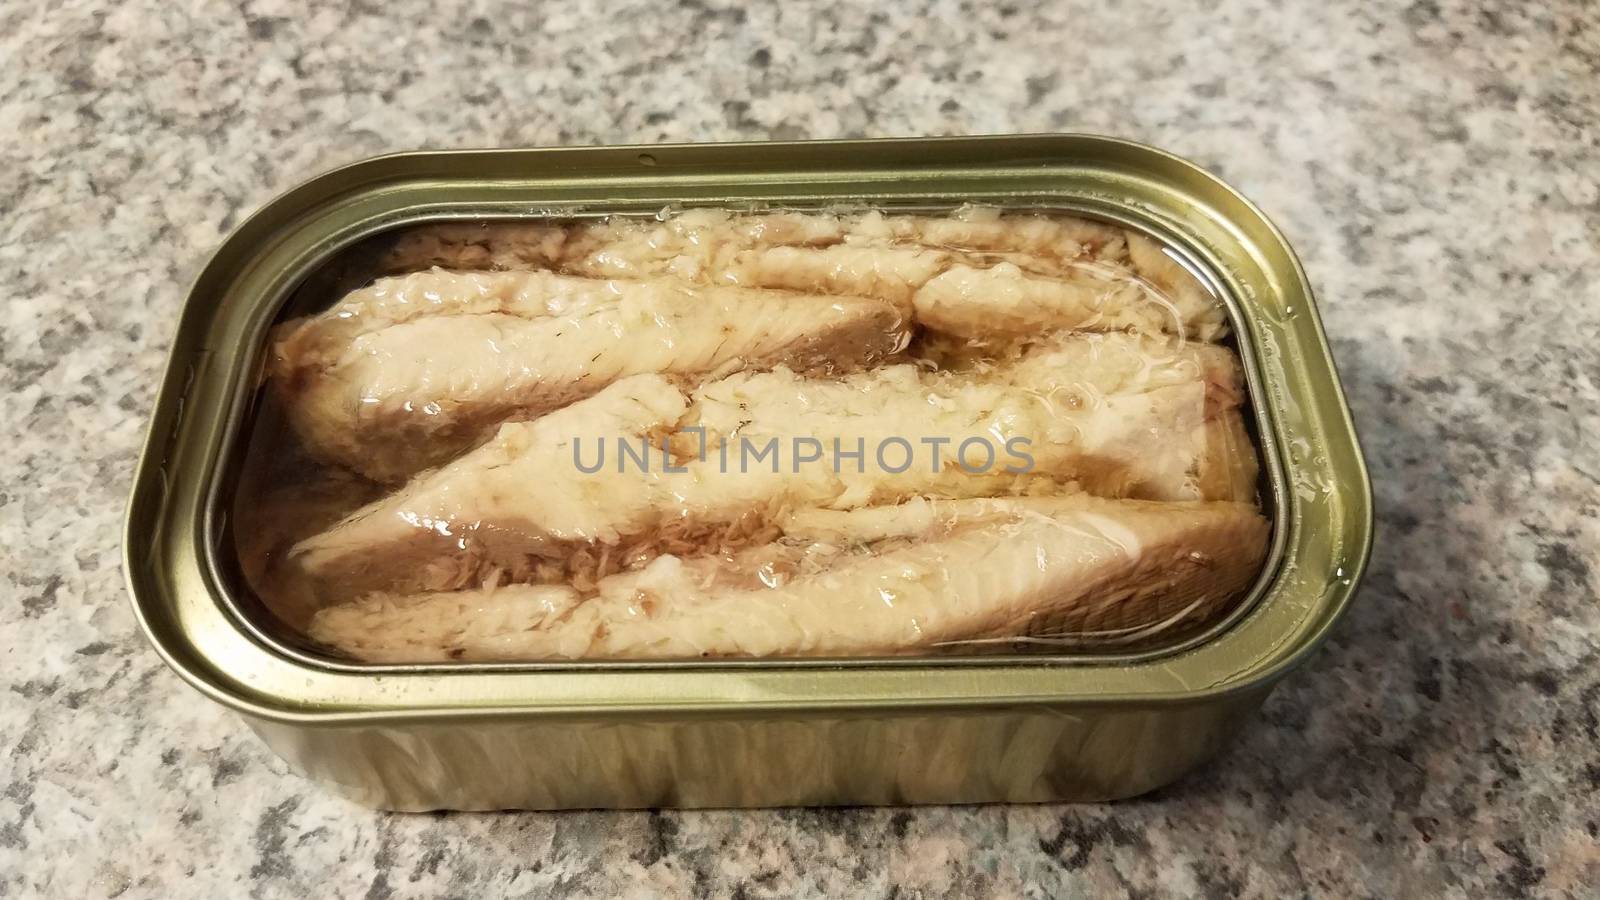 can of sardines in oil on counter by stockphotofan1